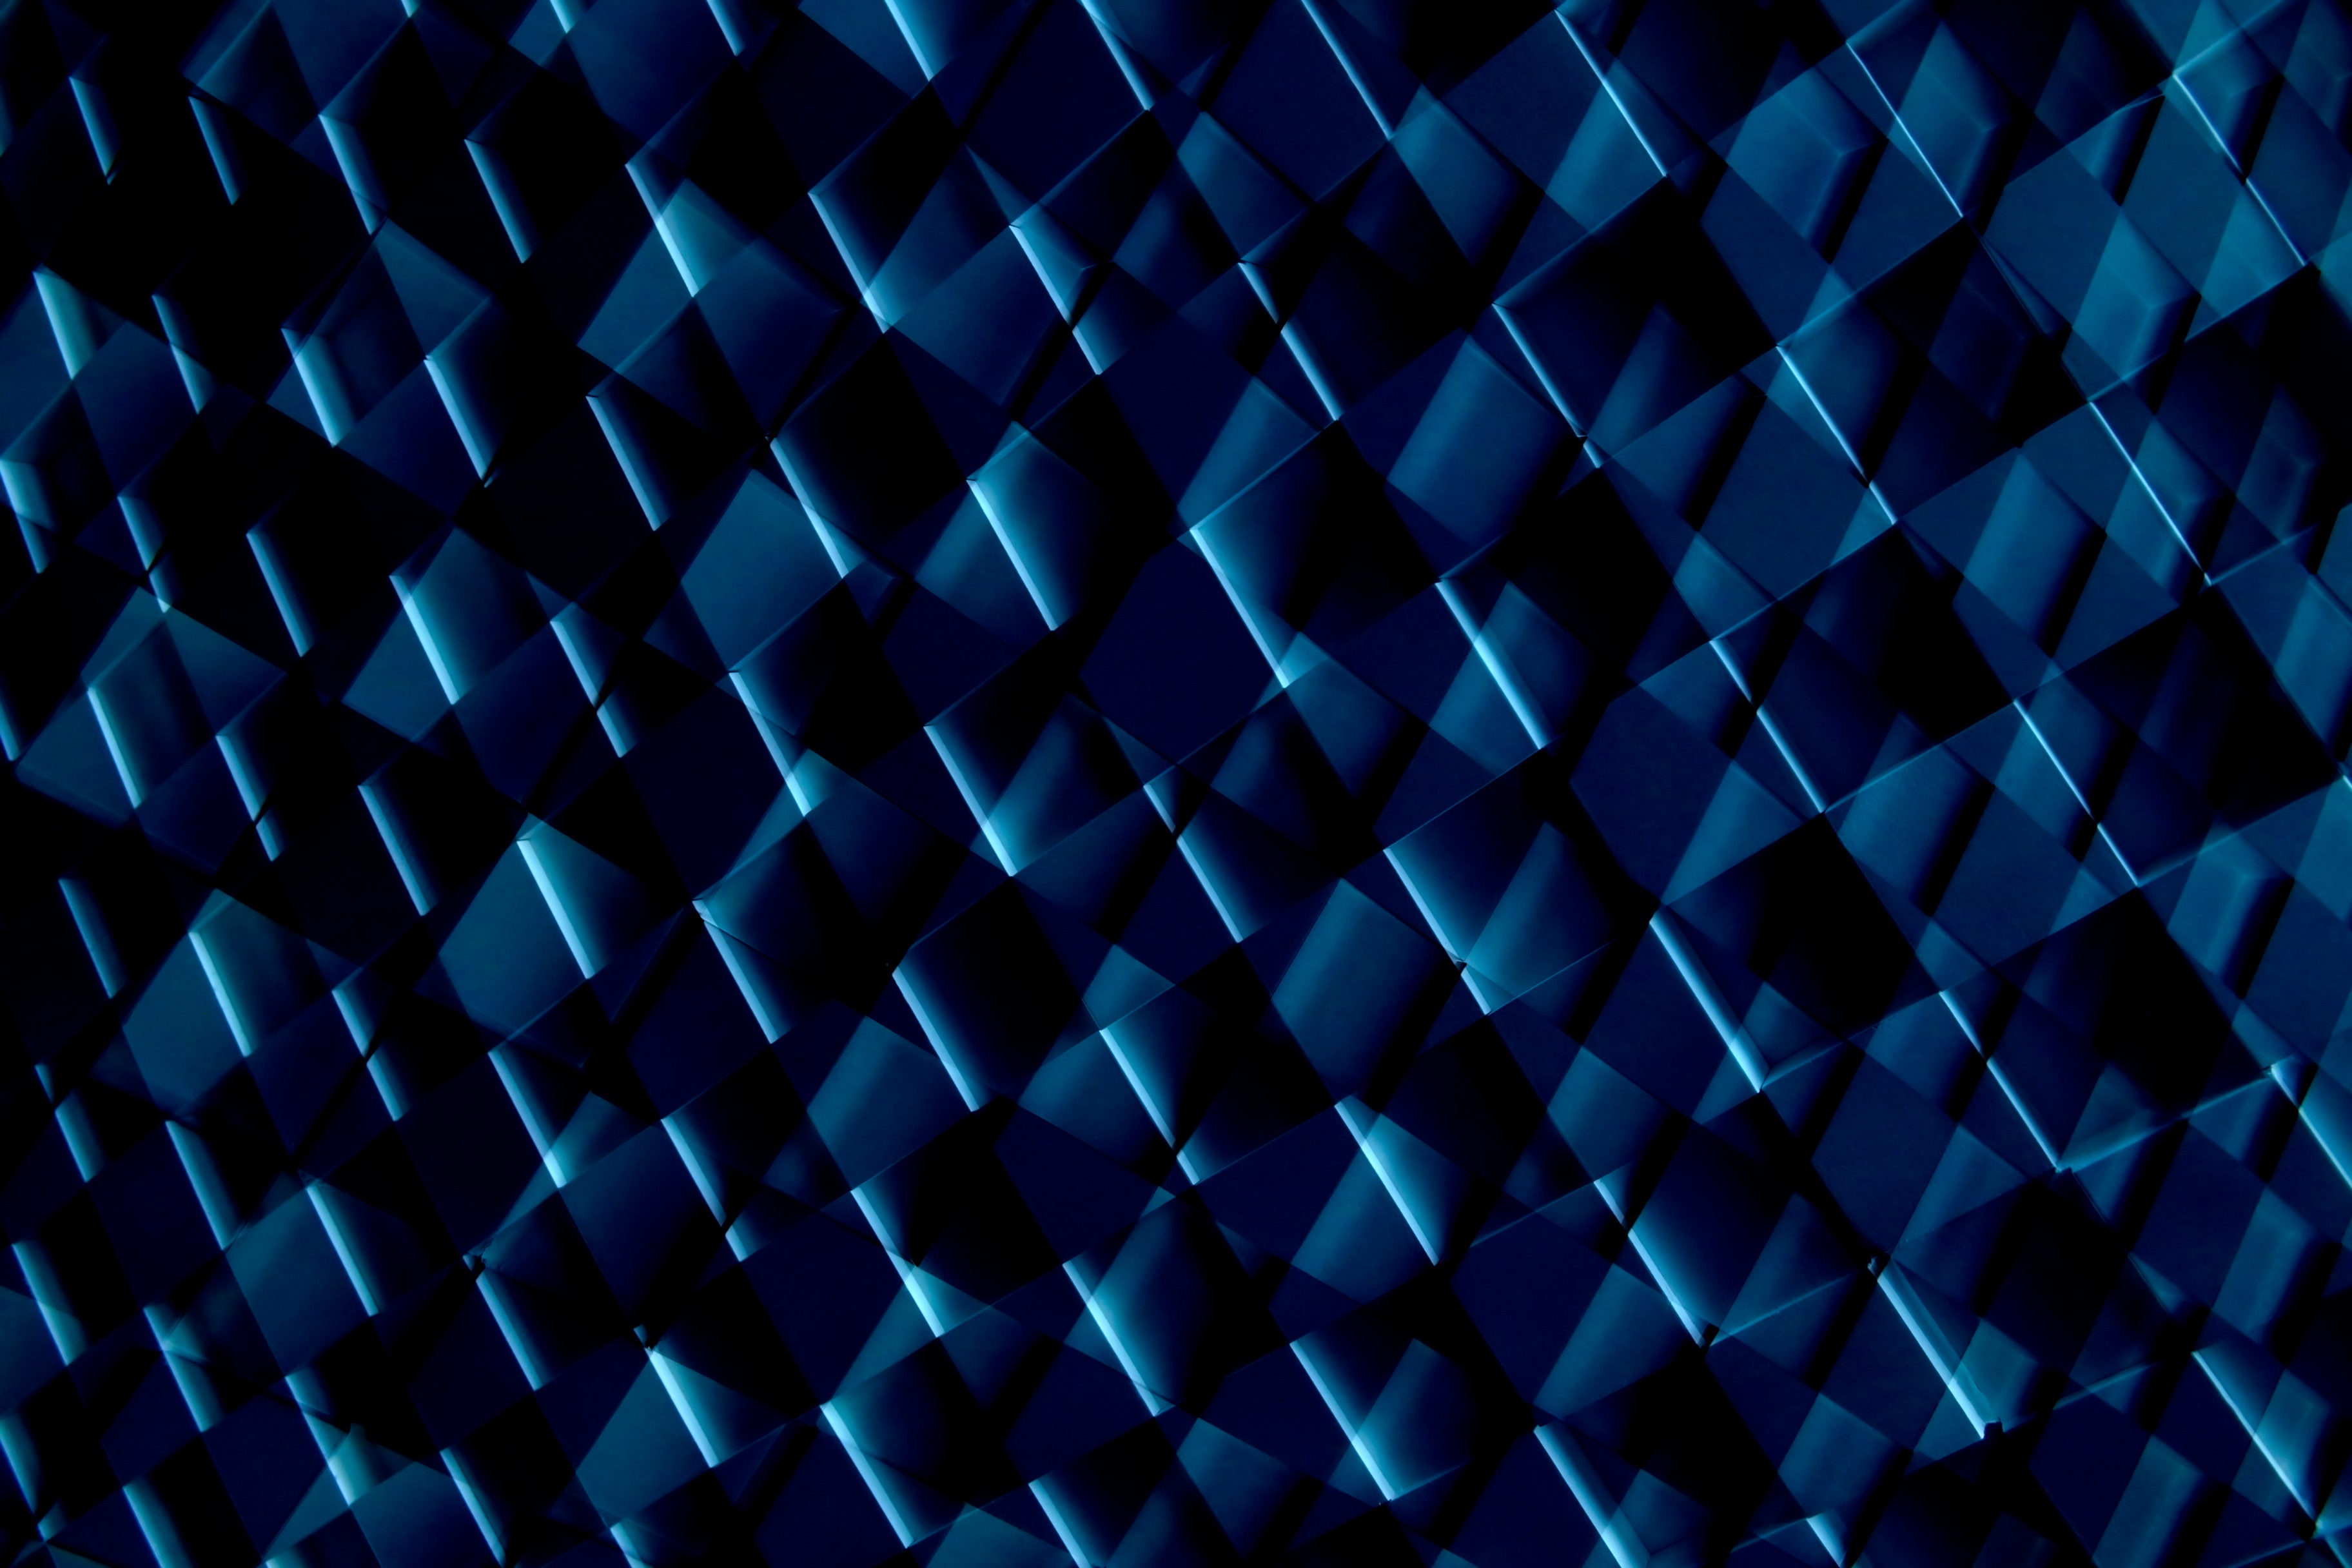 Abstract Geometry Texture Pattern Digital Tile Shapes Dark Blue Structure 3648x2432